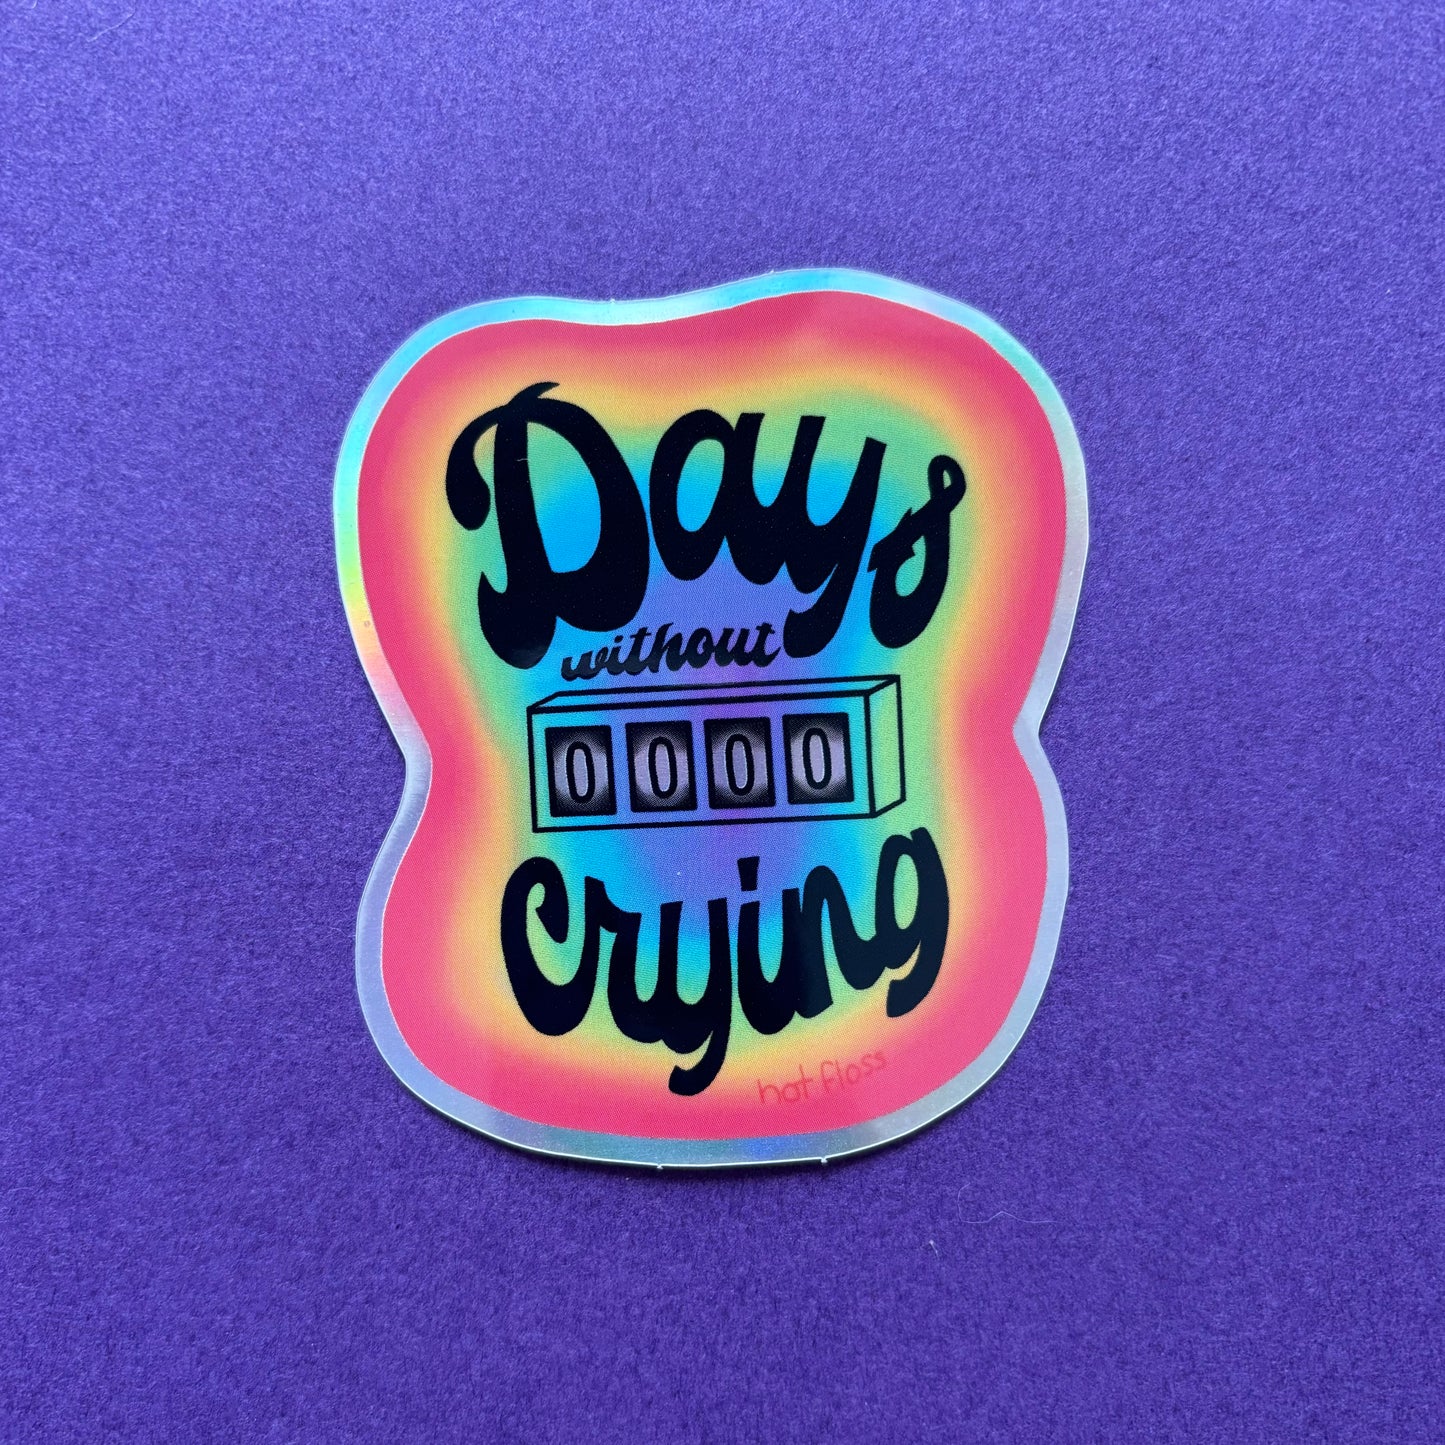 0 Days Without Crying Holo Sticker